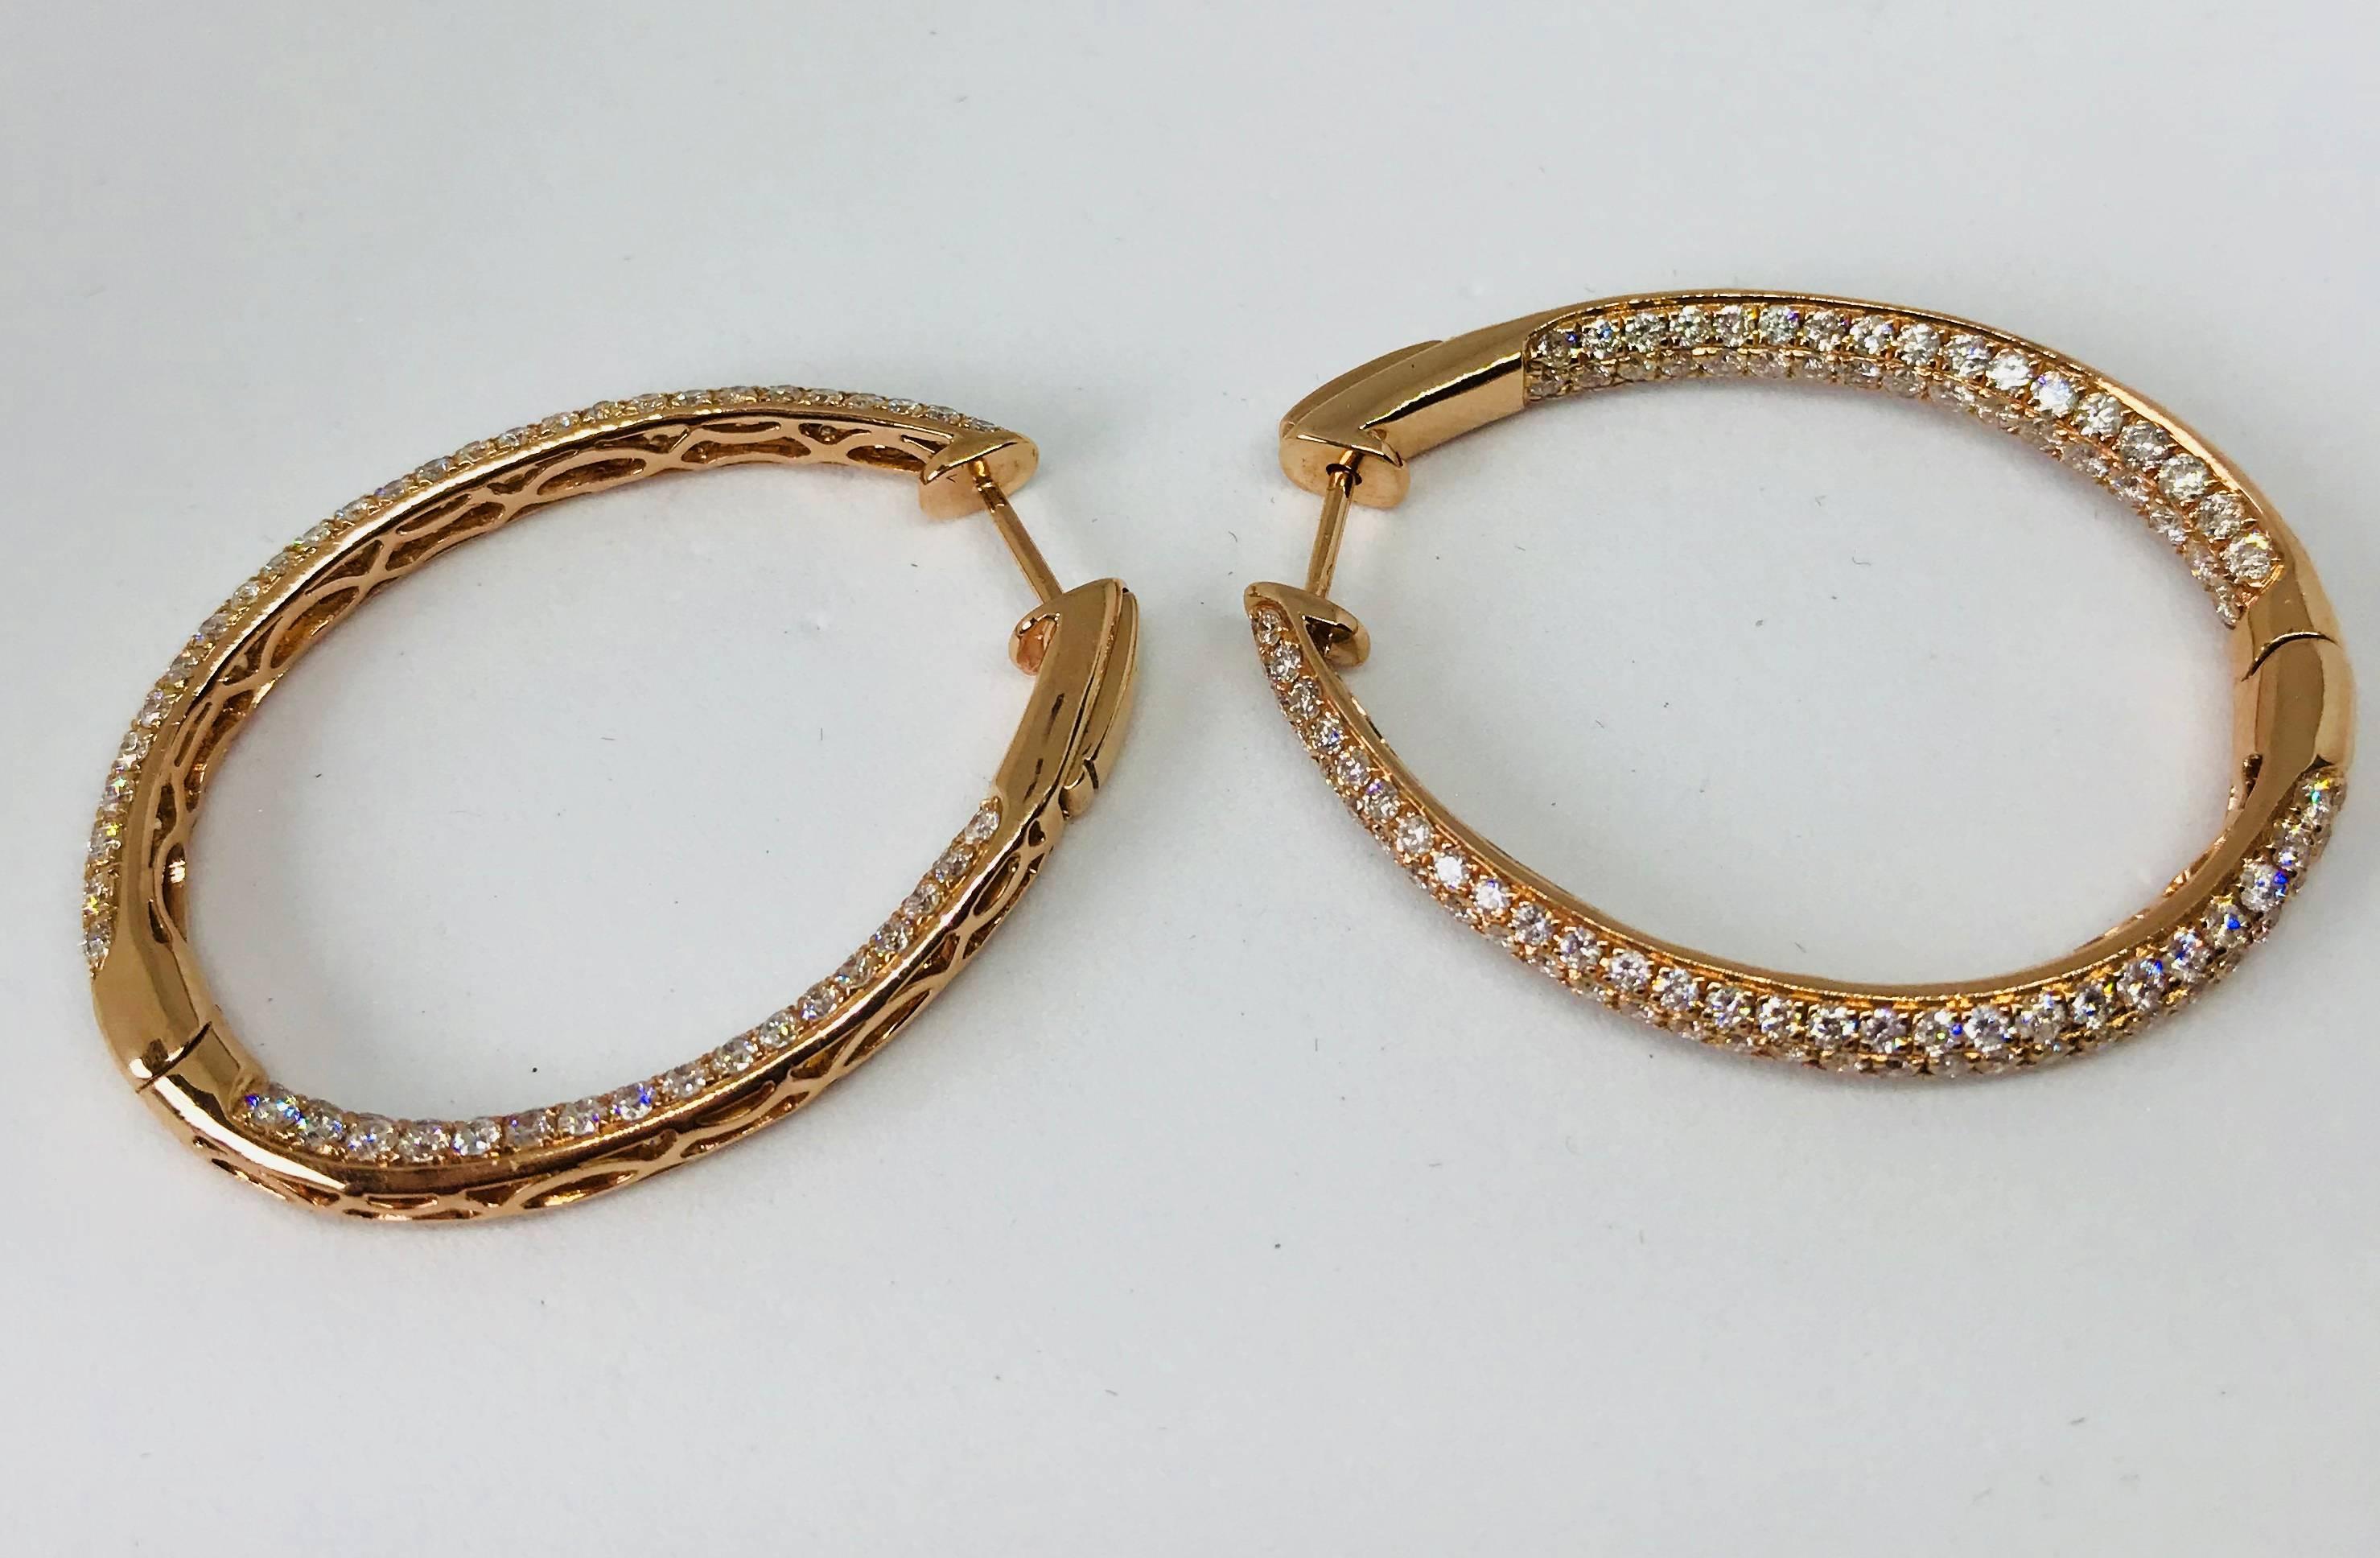 These hoop earrings proudly display rows of white diamonds in a beautiful yellow-gold oval. This timeless design goes well with everything and can be worn at any event, from a casual get together to a wedding!

Gold: 14 karat Yellow Gold 11.94